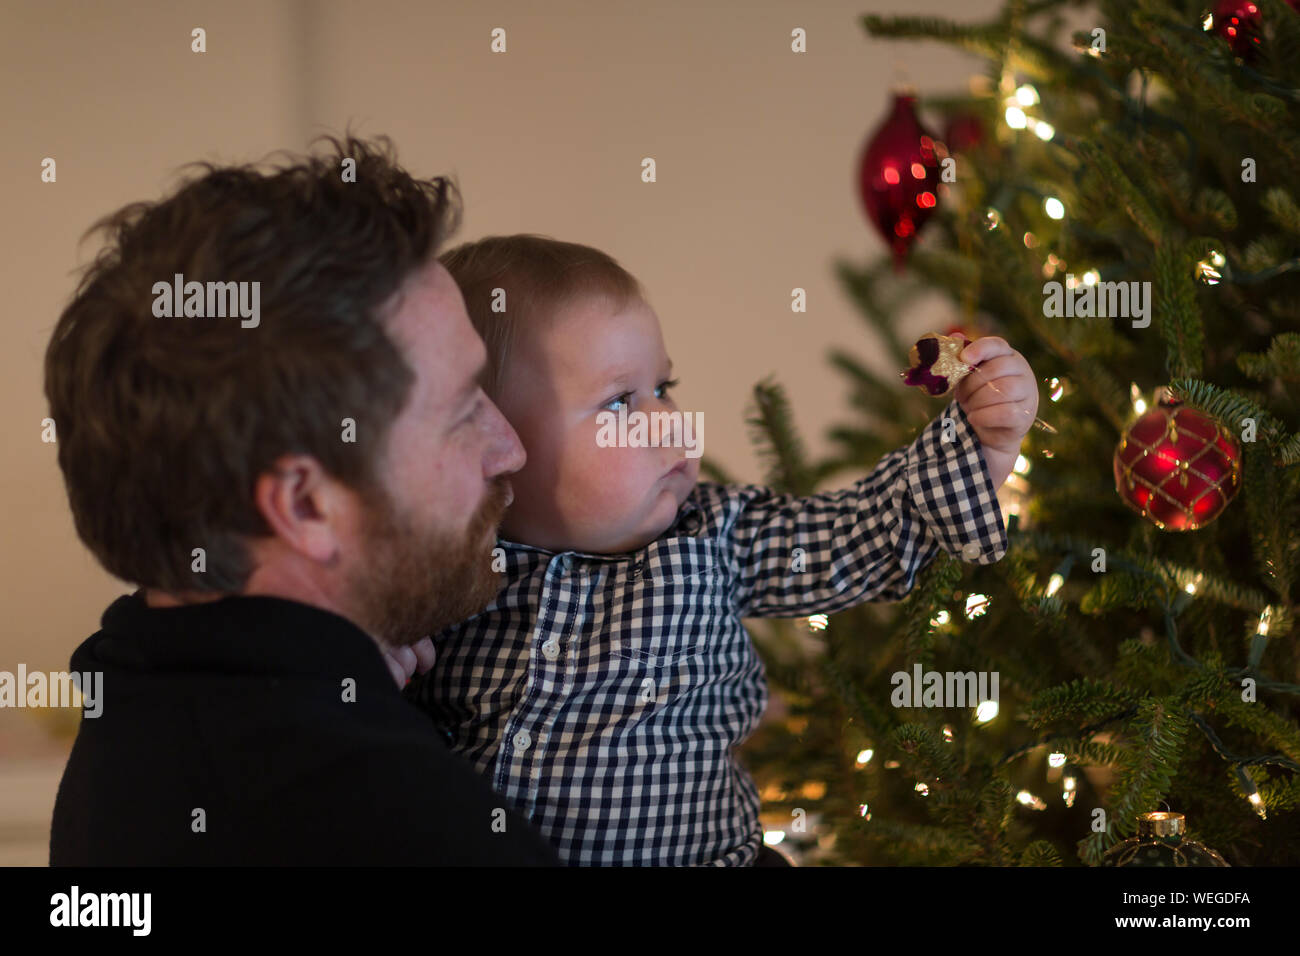 Father holds 1 year old boy who is reaching for decoration on Christmas tree Stock Photo